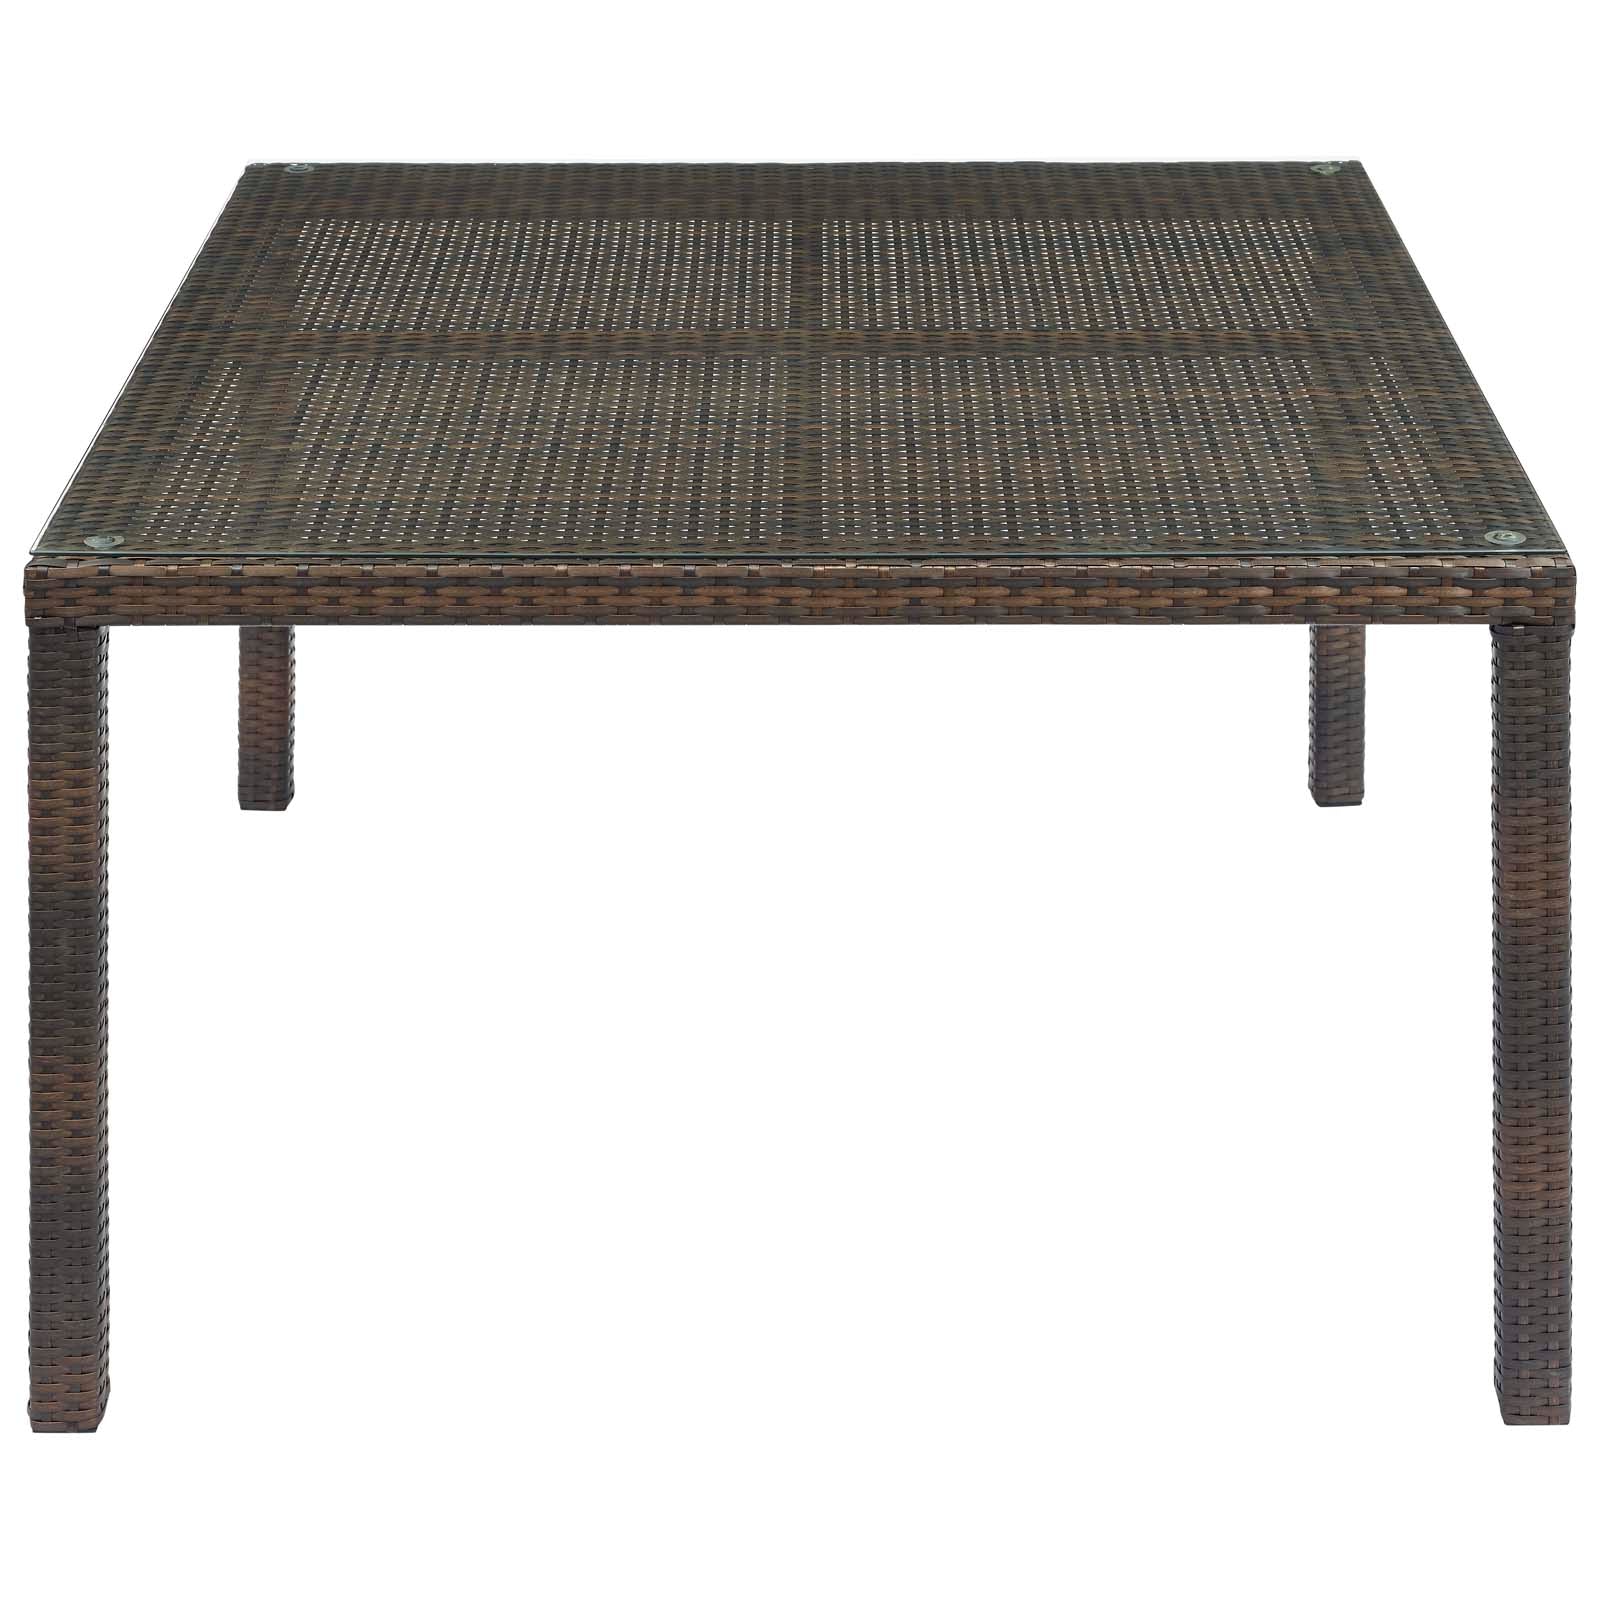 Conduit 47" Outdoor Patio Wicker Rattan Dining Table - East Shore Modern Home Furnishings